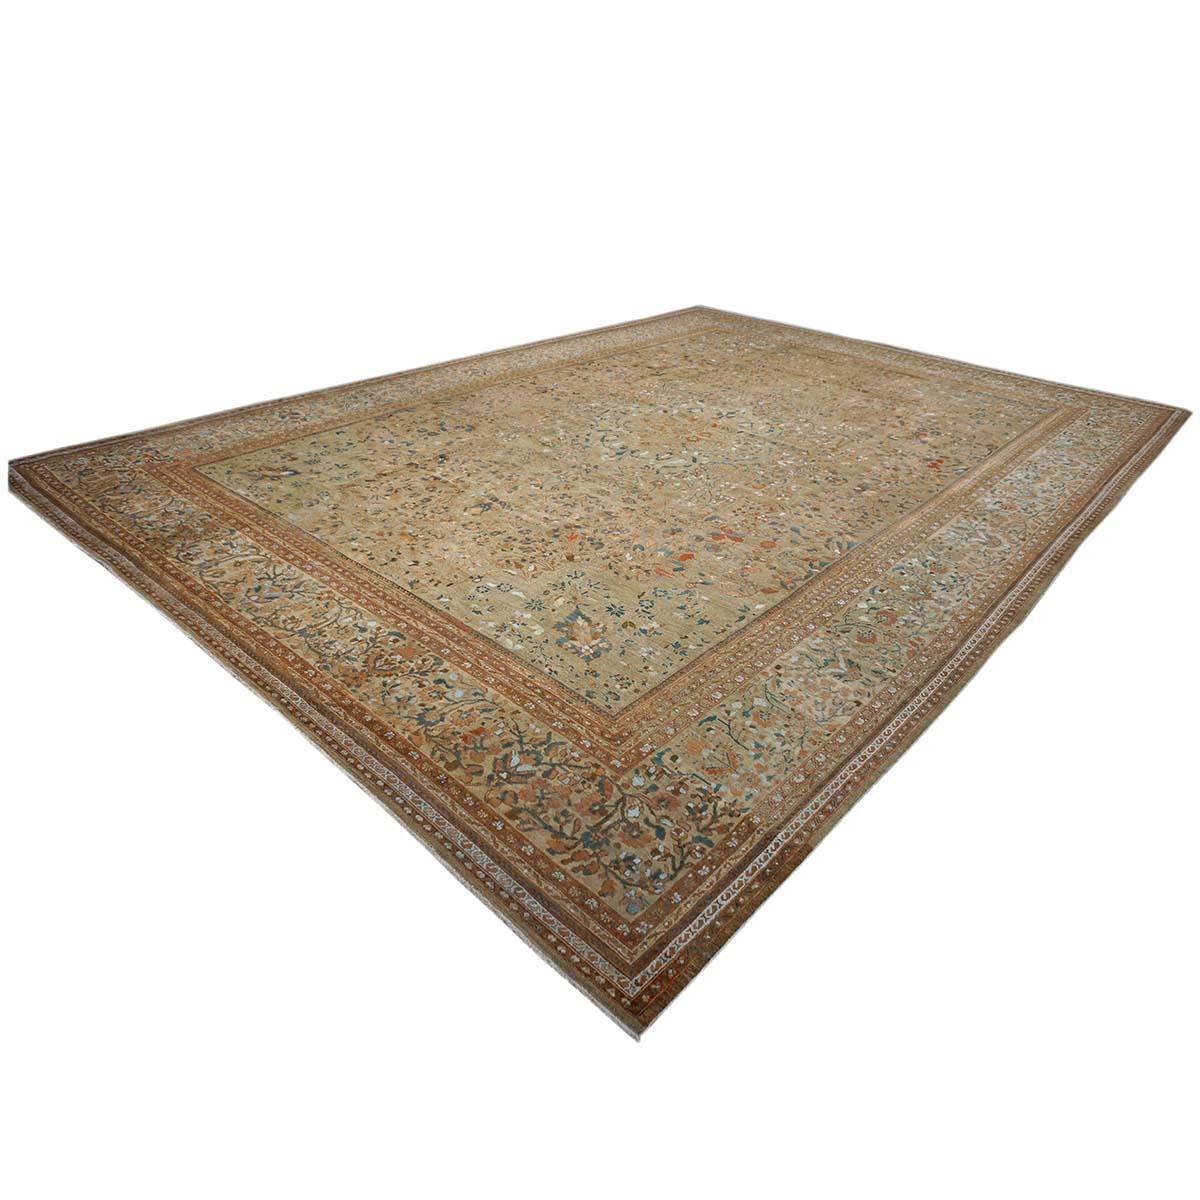 1870s Antique Persian Ziegler Sultanabad 15x21 Tan, Rust, & Light Blue Area Rug In Good Condition For Sale In Houston, TX